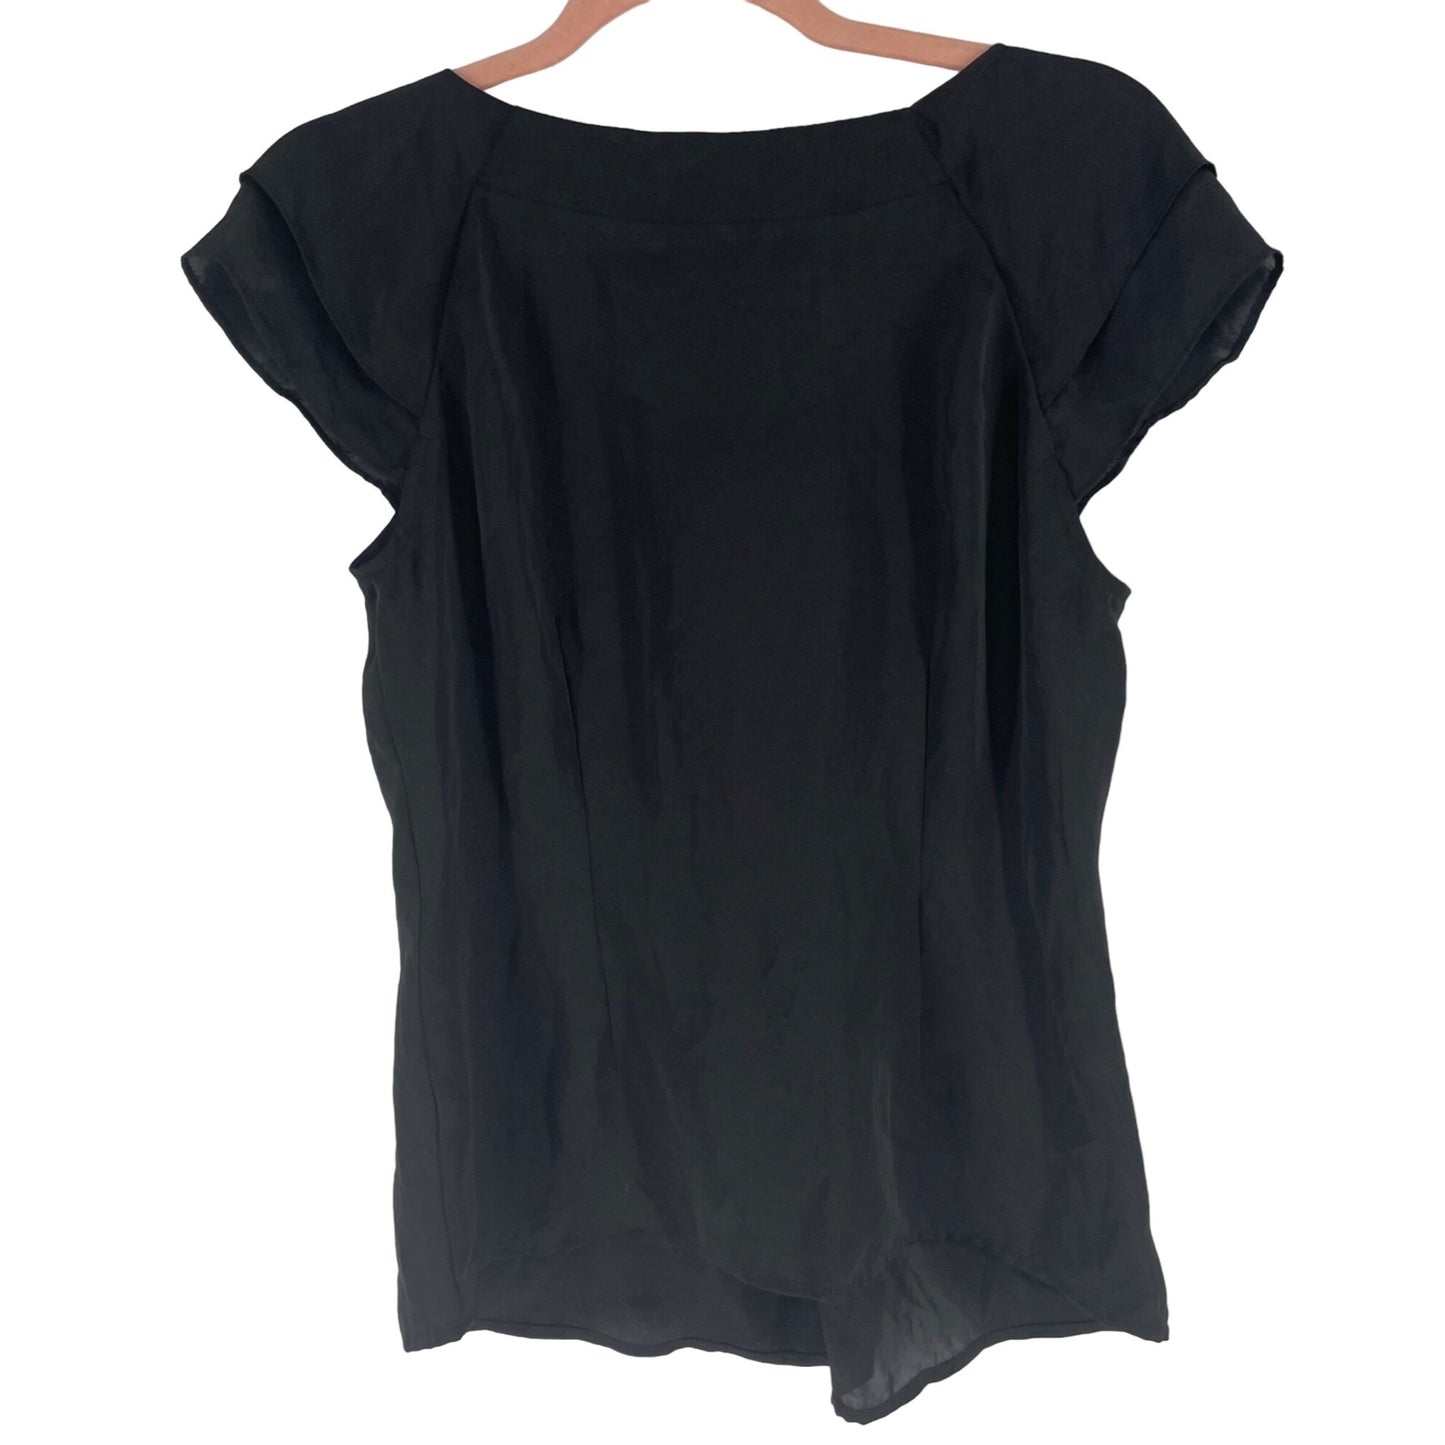 Violet & Claire Women's Size Small Black Ruffle Sleeve Satin Top